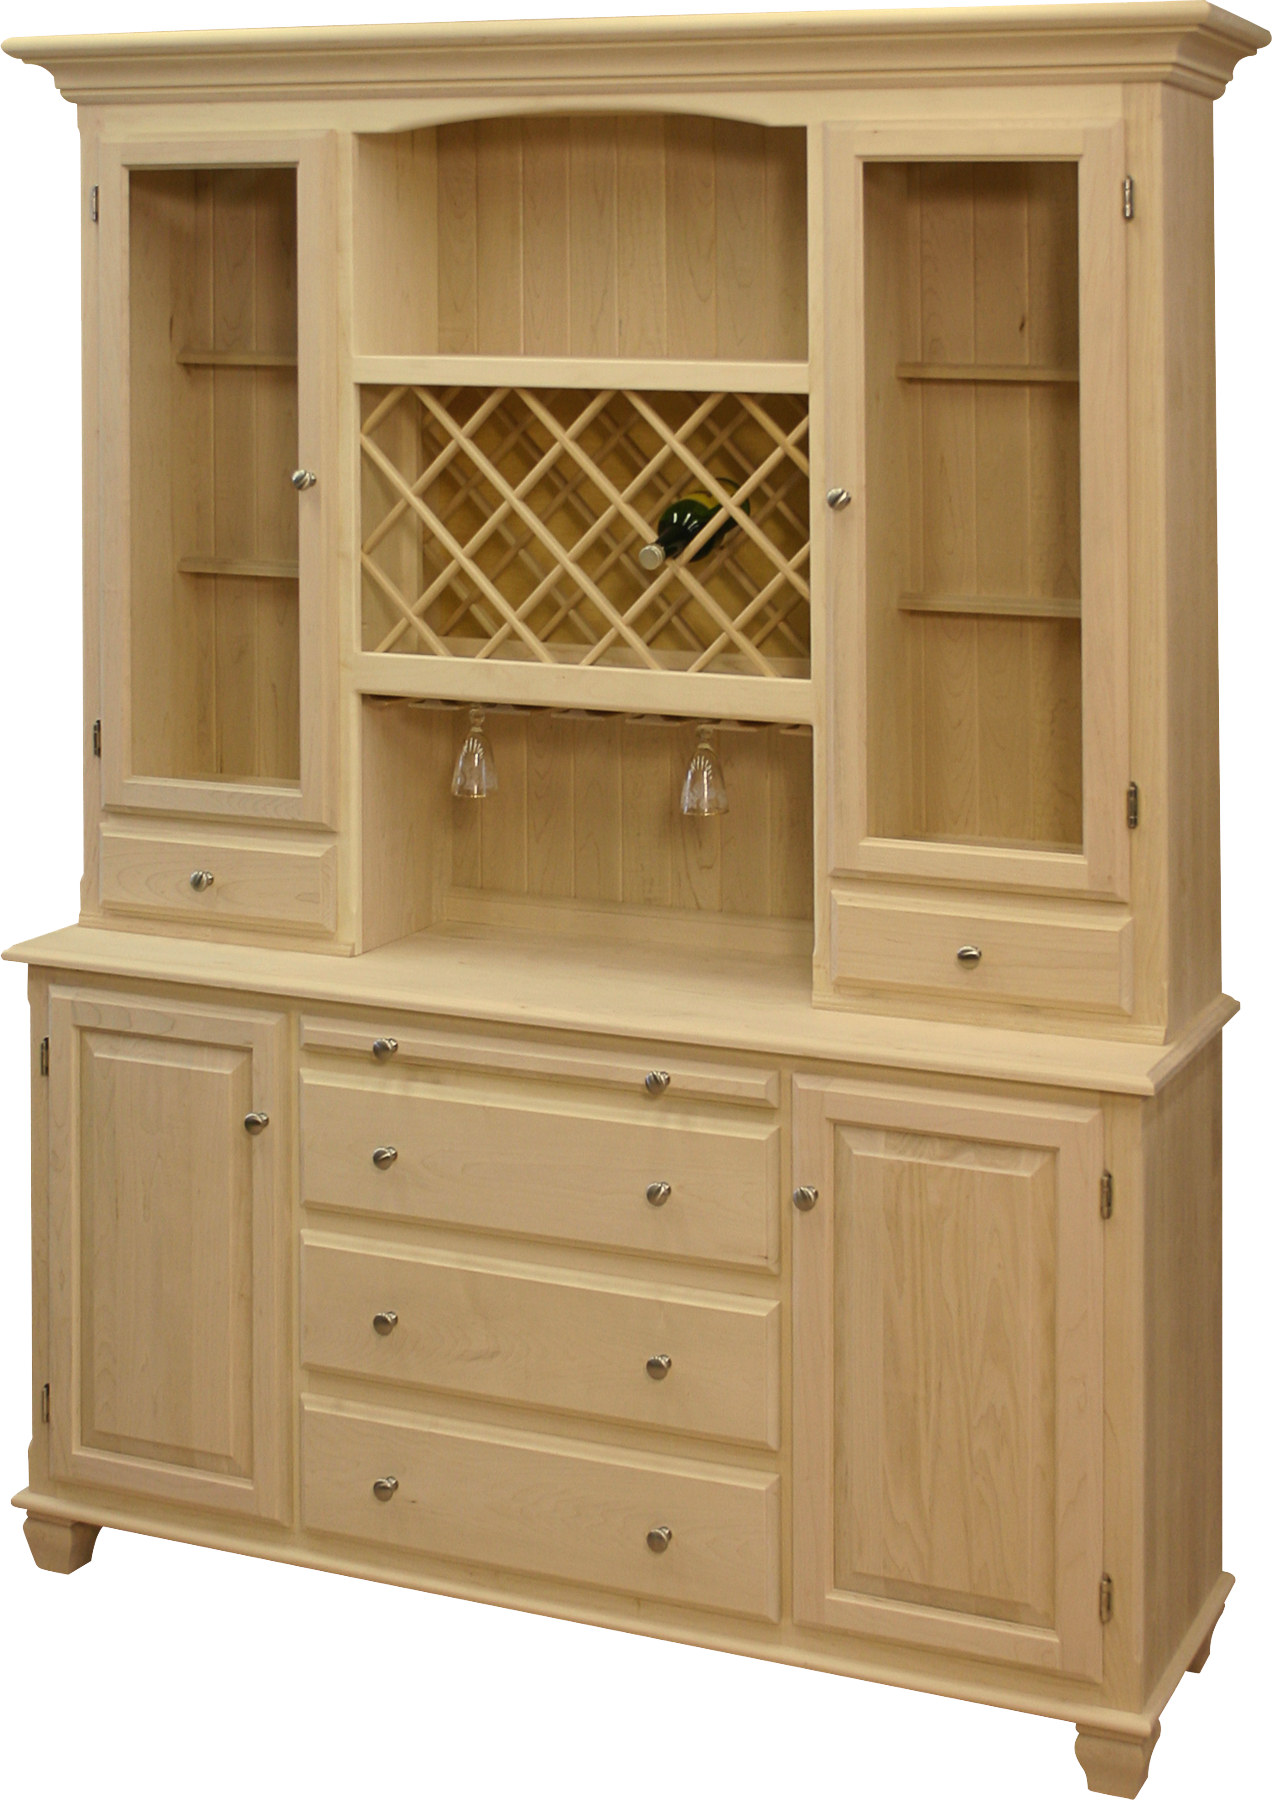 Legacy 4 Door Buffet with Hutch and Wine Rack